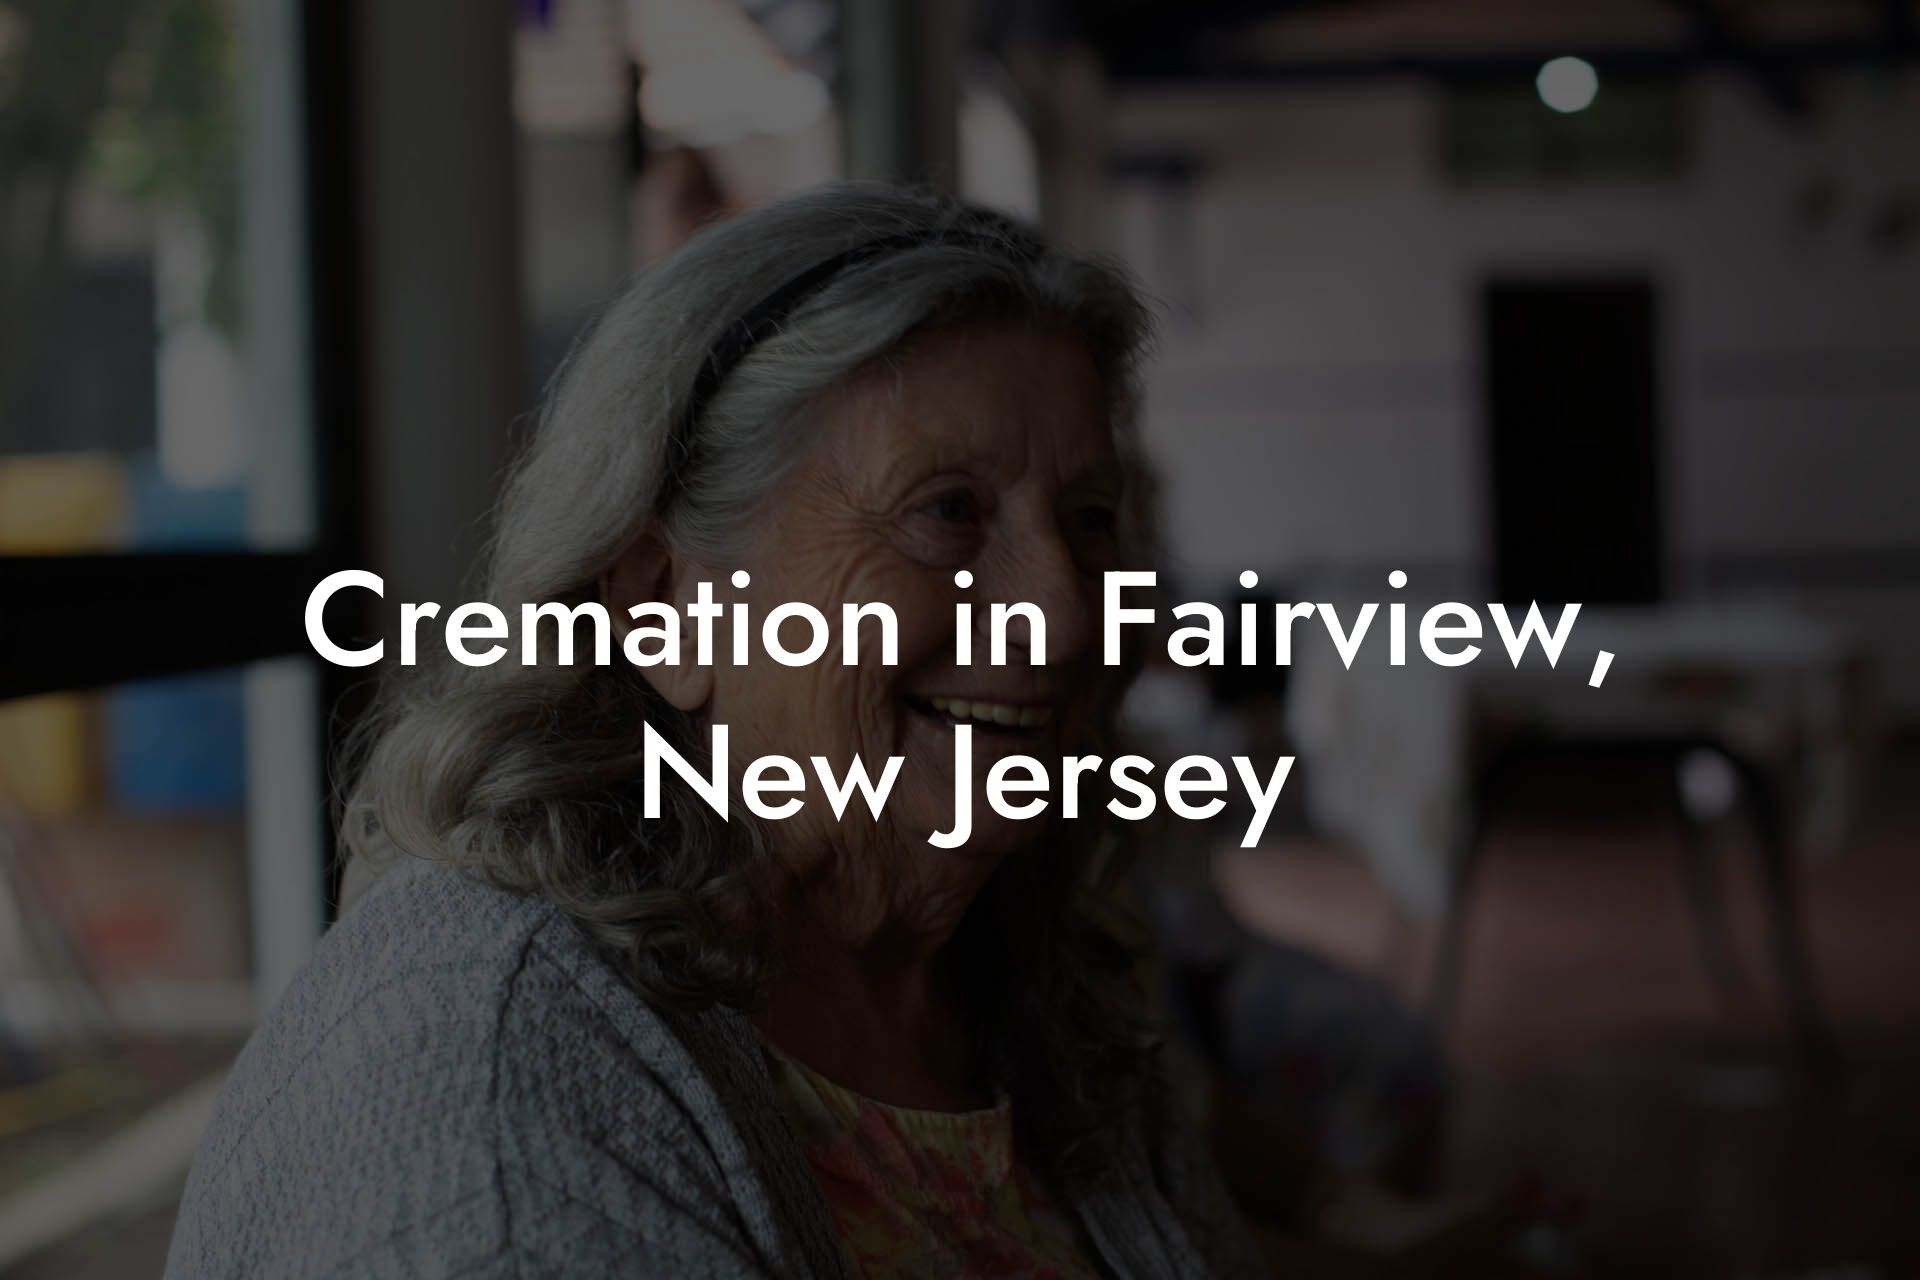 Cremation in Fairview, New Jersey